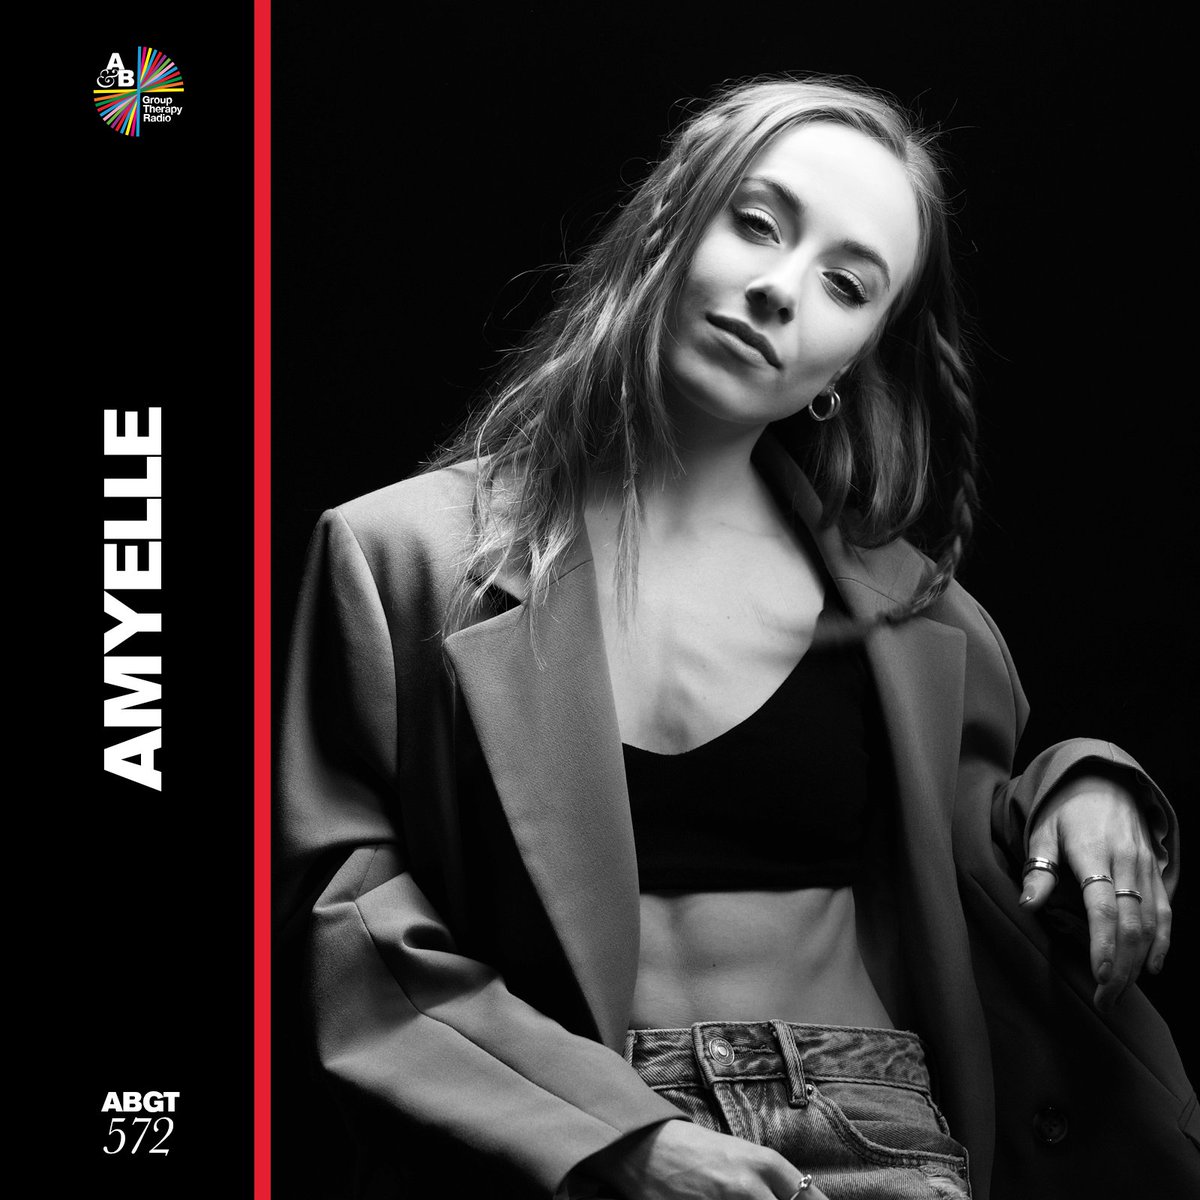 📣 Our guest mixer this week is Texas-born, Scotland-based DJ and producer @AmyElle You may have heard a number of her tracks over the years on ABGT, including a remix of 28mm and Julian Gray's 'Take Me Back' 🪩 Tune in tomorrow at 7pm GMT to hear her exclusive guest mix 🎶